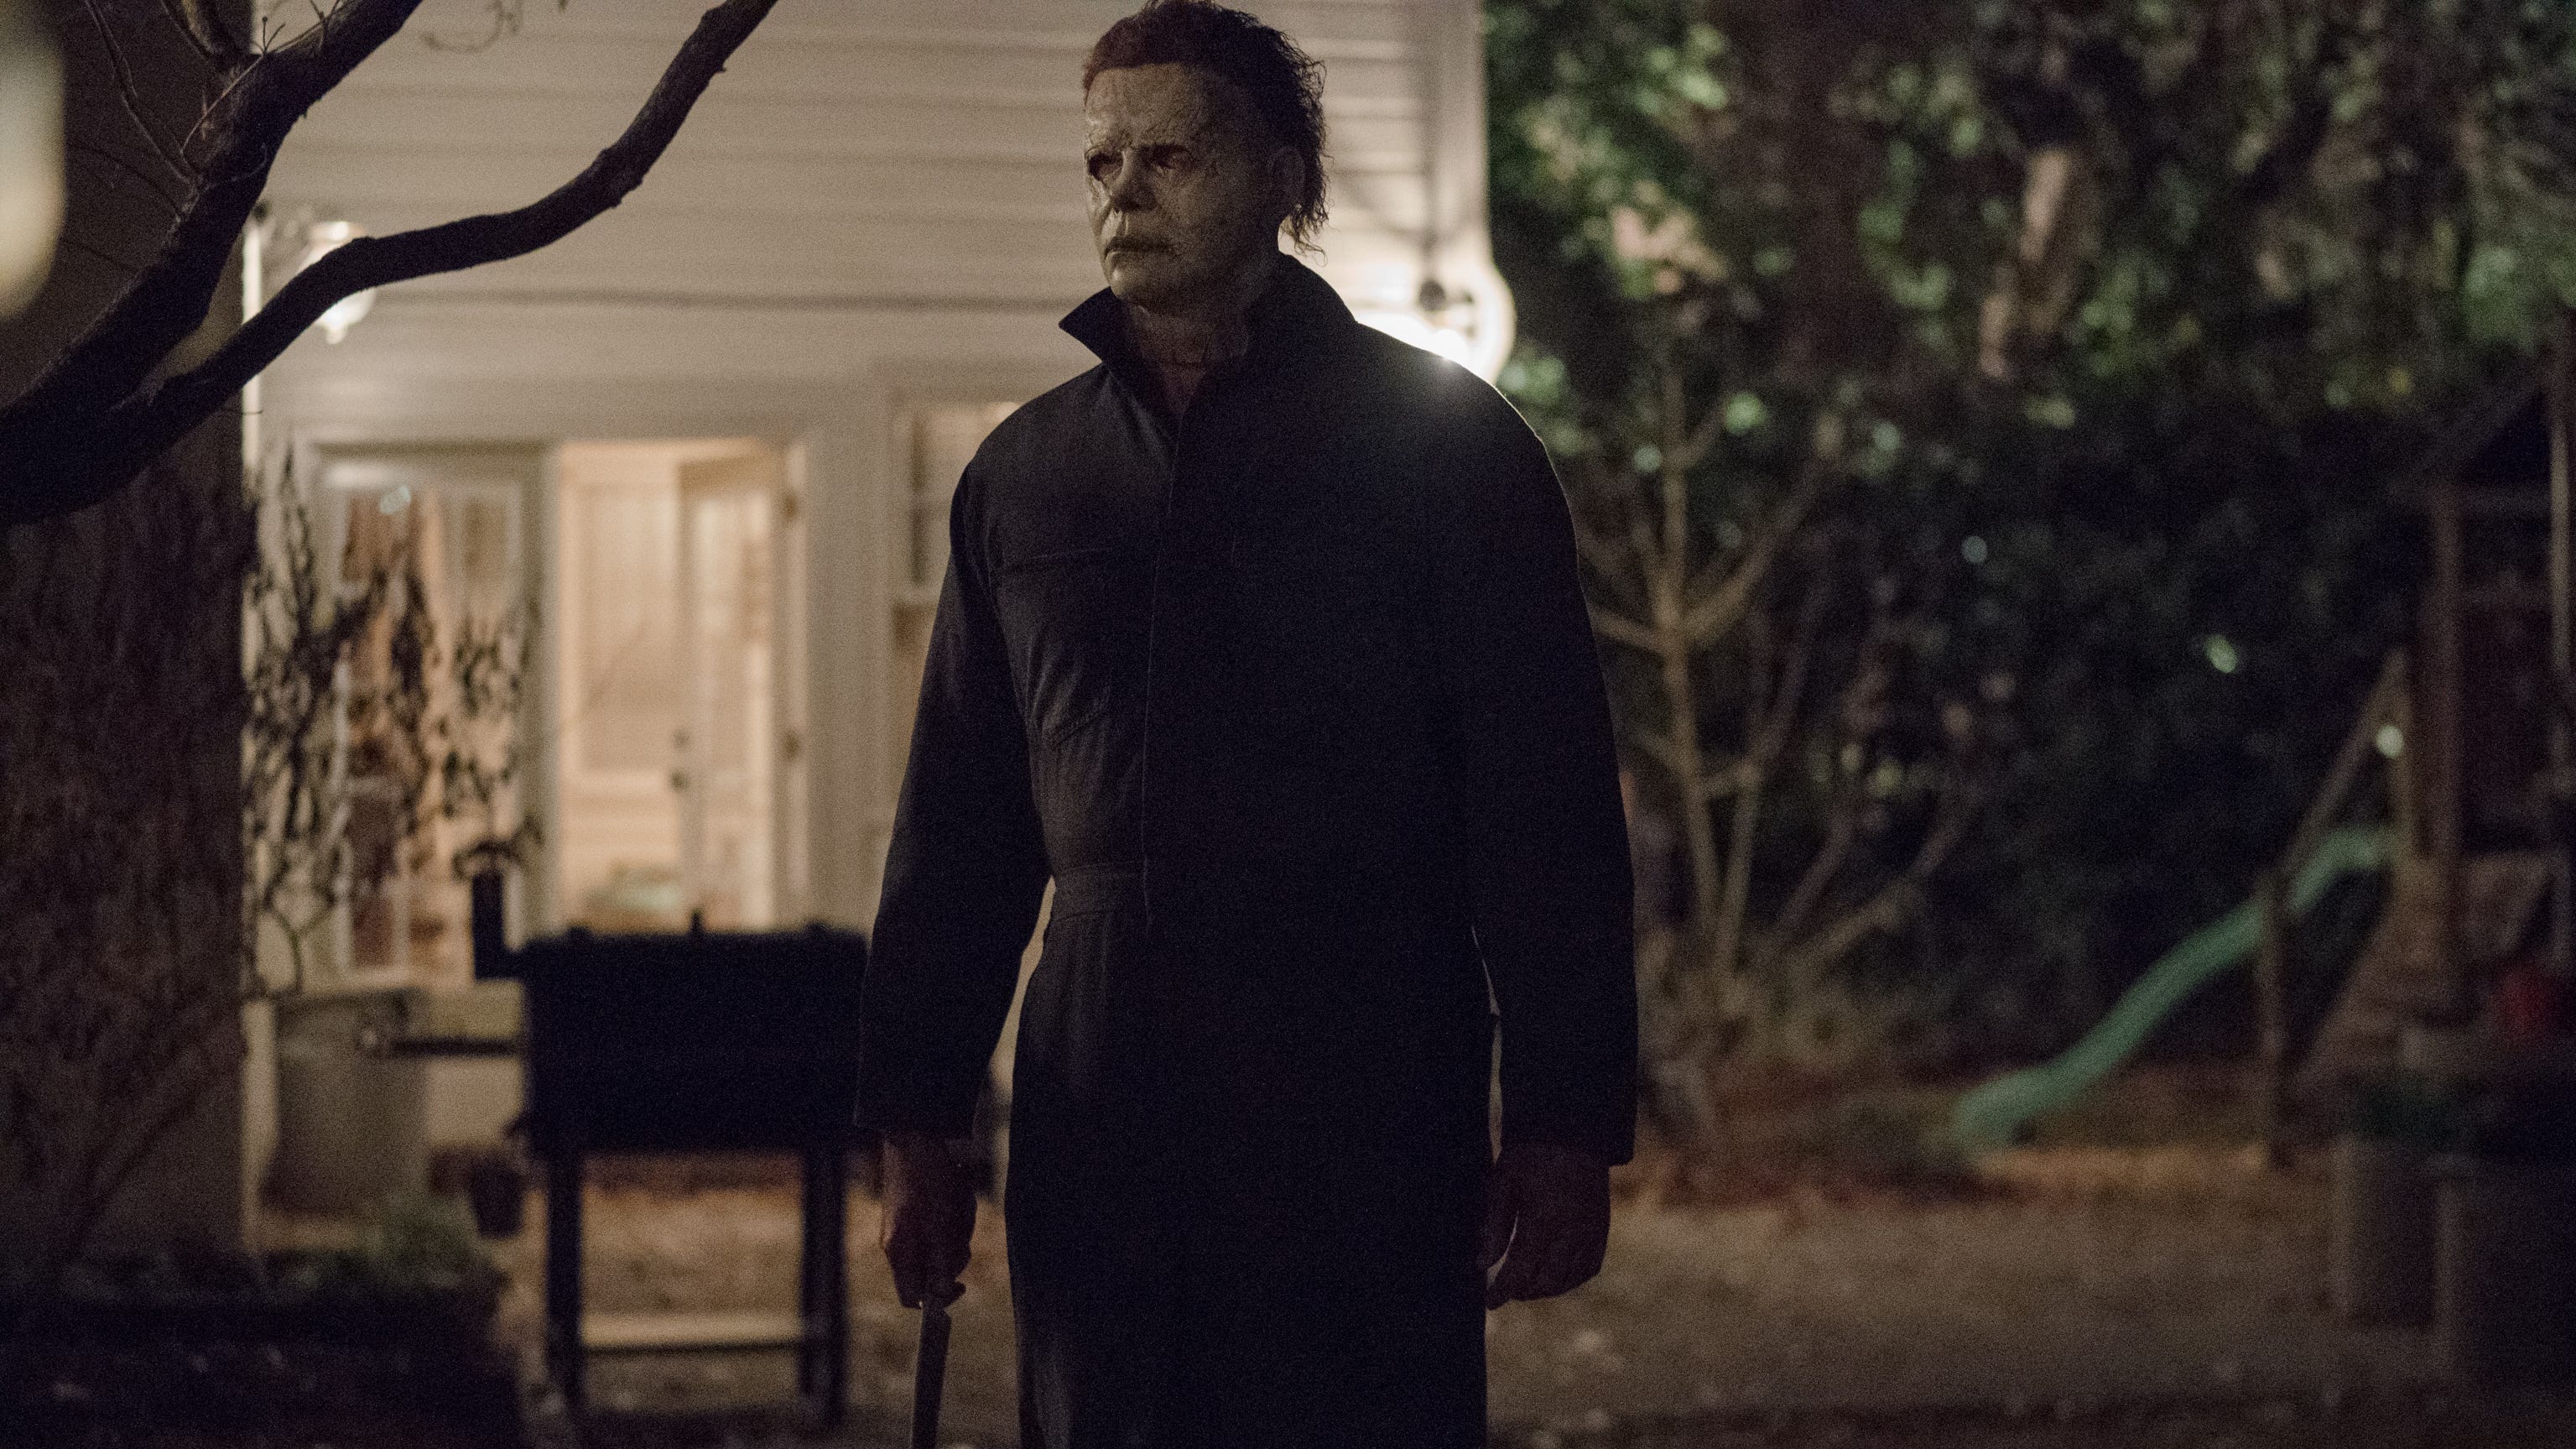 'Halloween' spoiler Why Michael Myers shows odd mercy in new movie